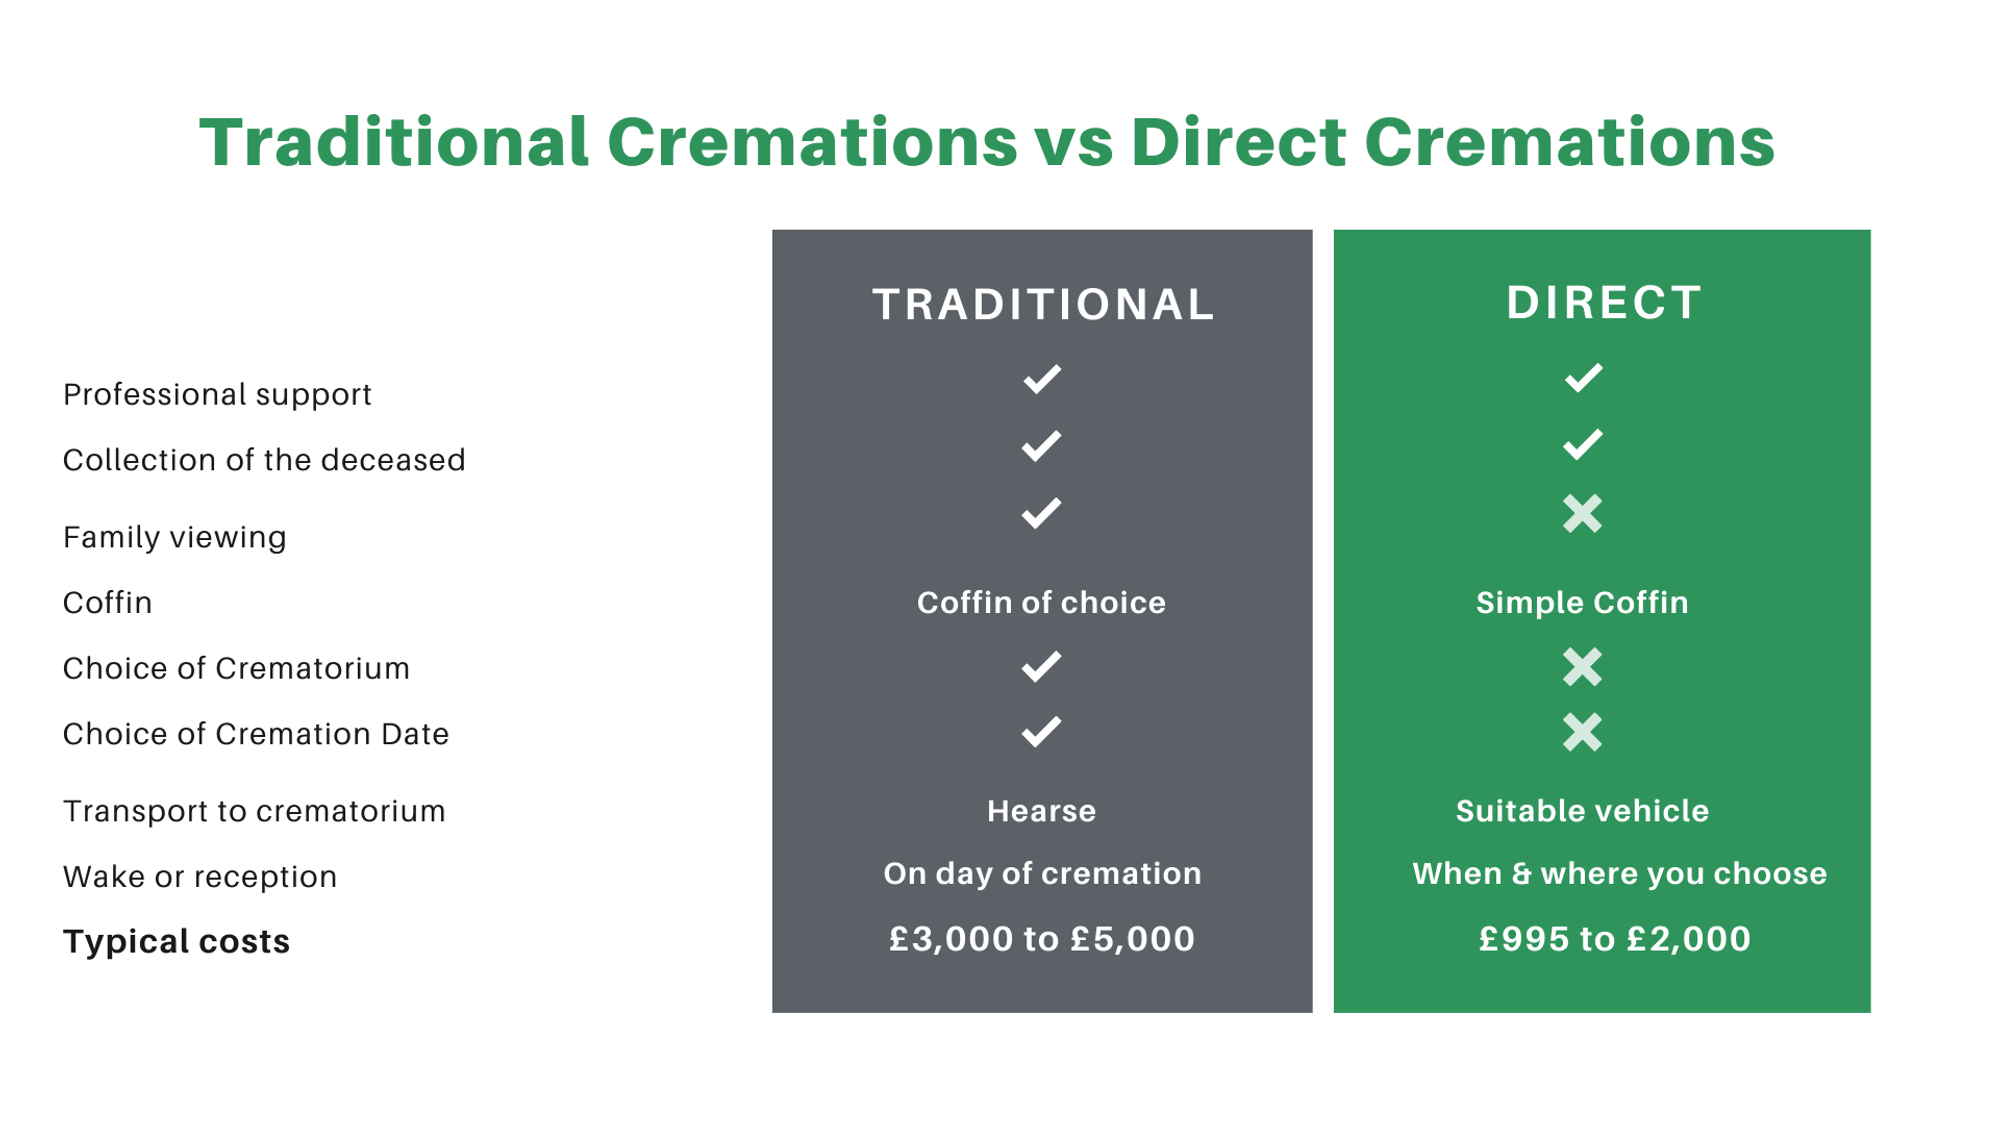 Awareness of direct cremations is growing, with 59% of people now aware of what a direct cremation is, a 7% increase over pre-covid times.